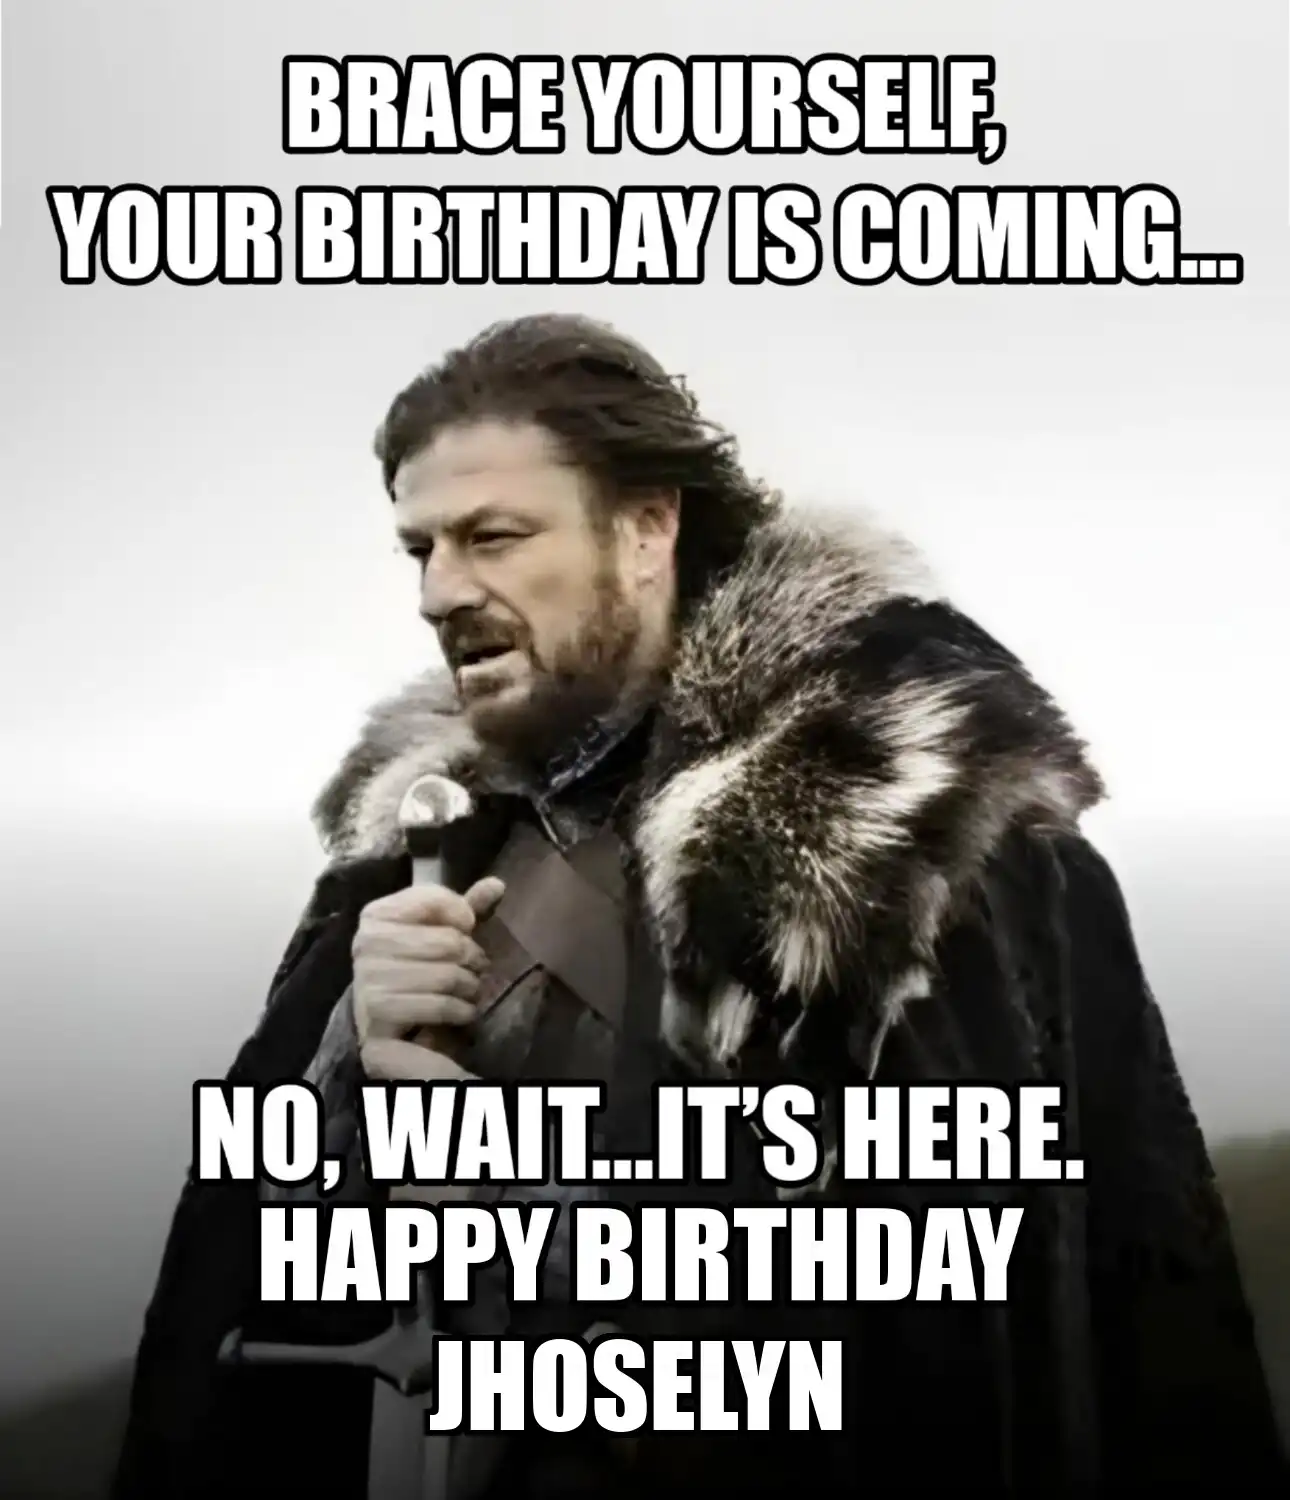 Happy Birthday Jhoselyn Brace Yourself Your Birthday Is Coming Meme